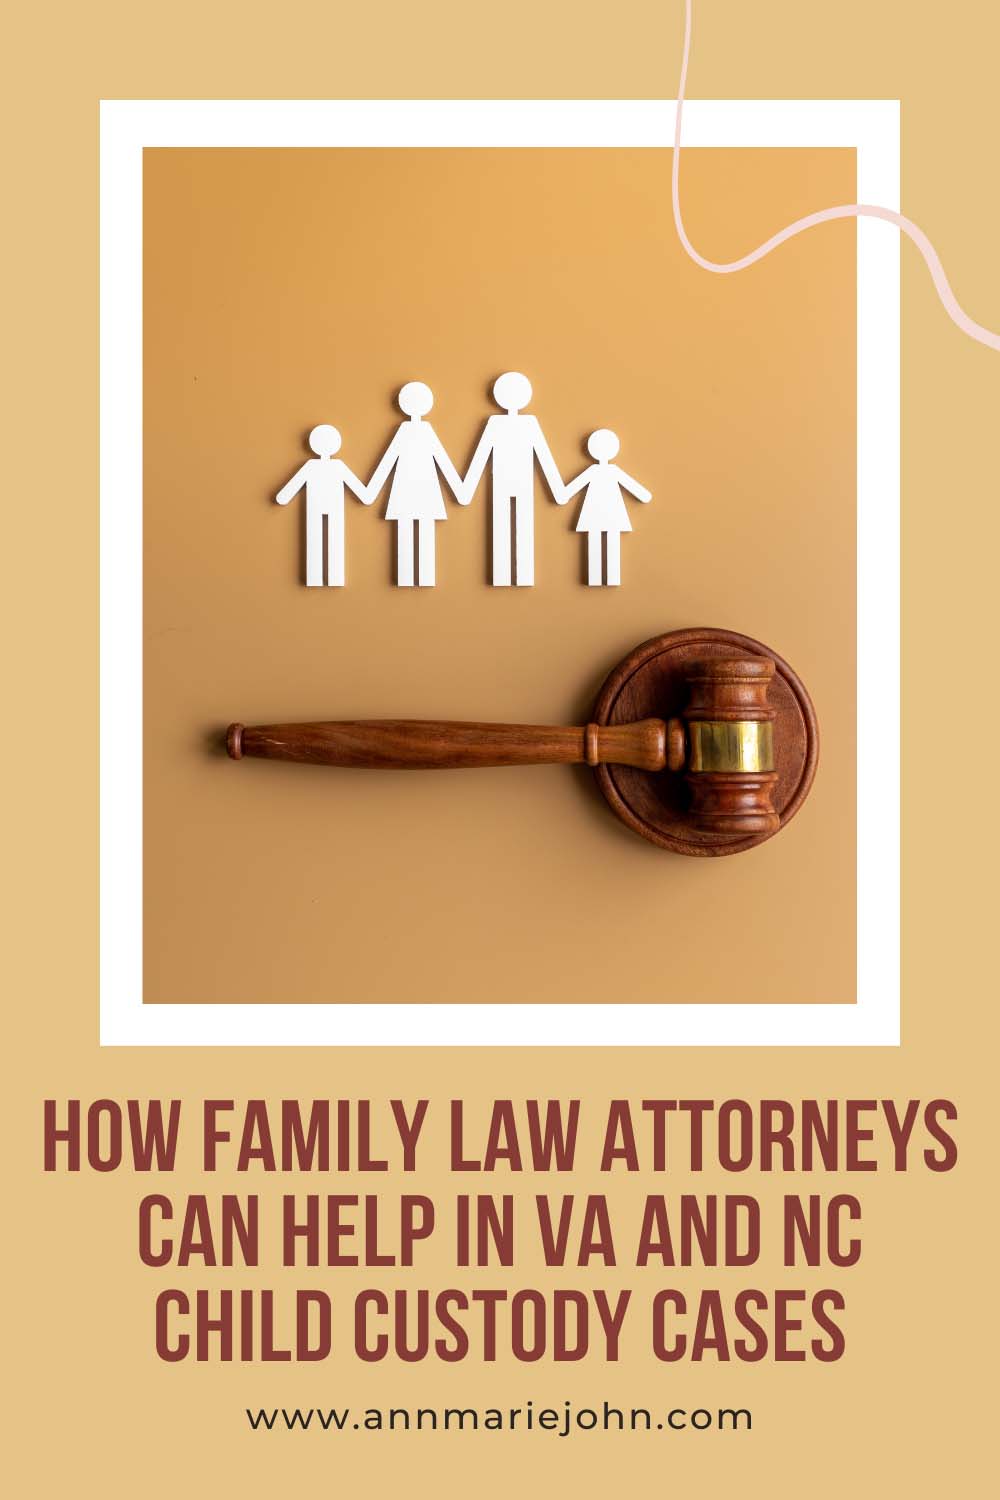 How Family Law Attorneys can Help In VA And NC Child Custody Cases